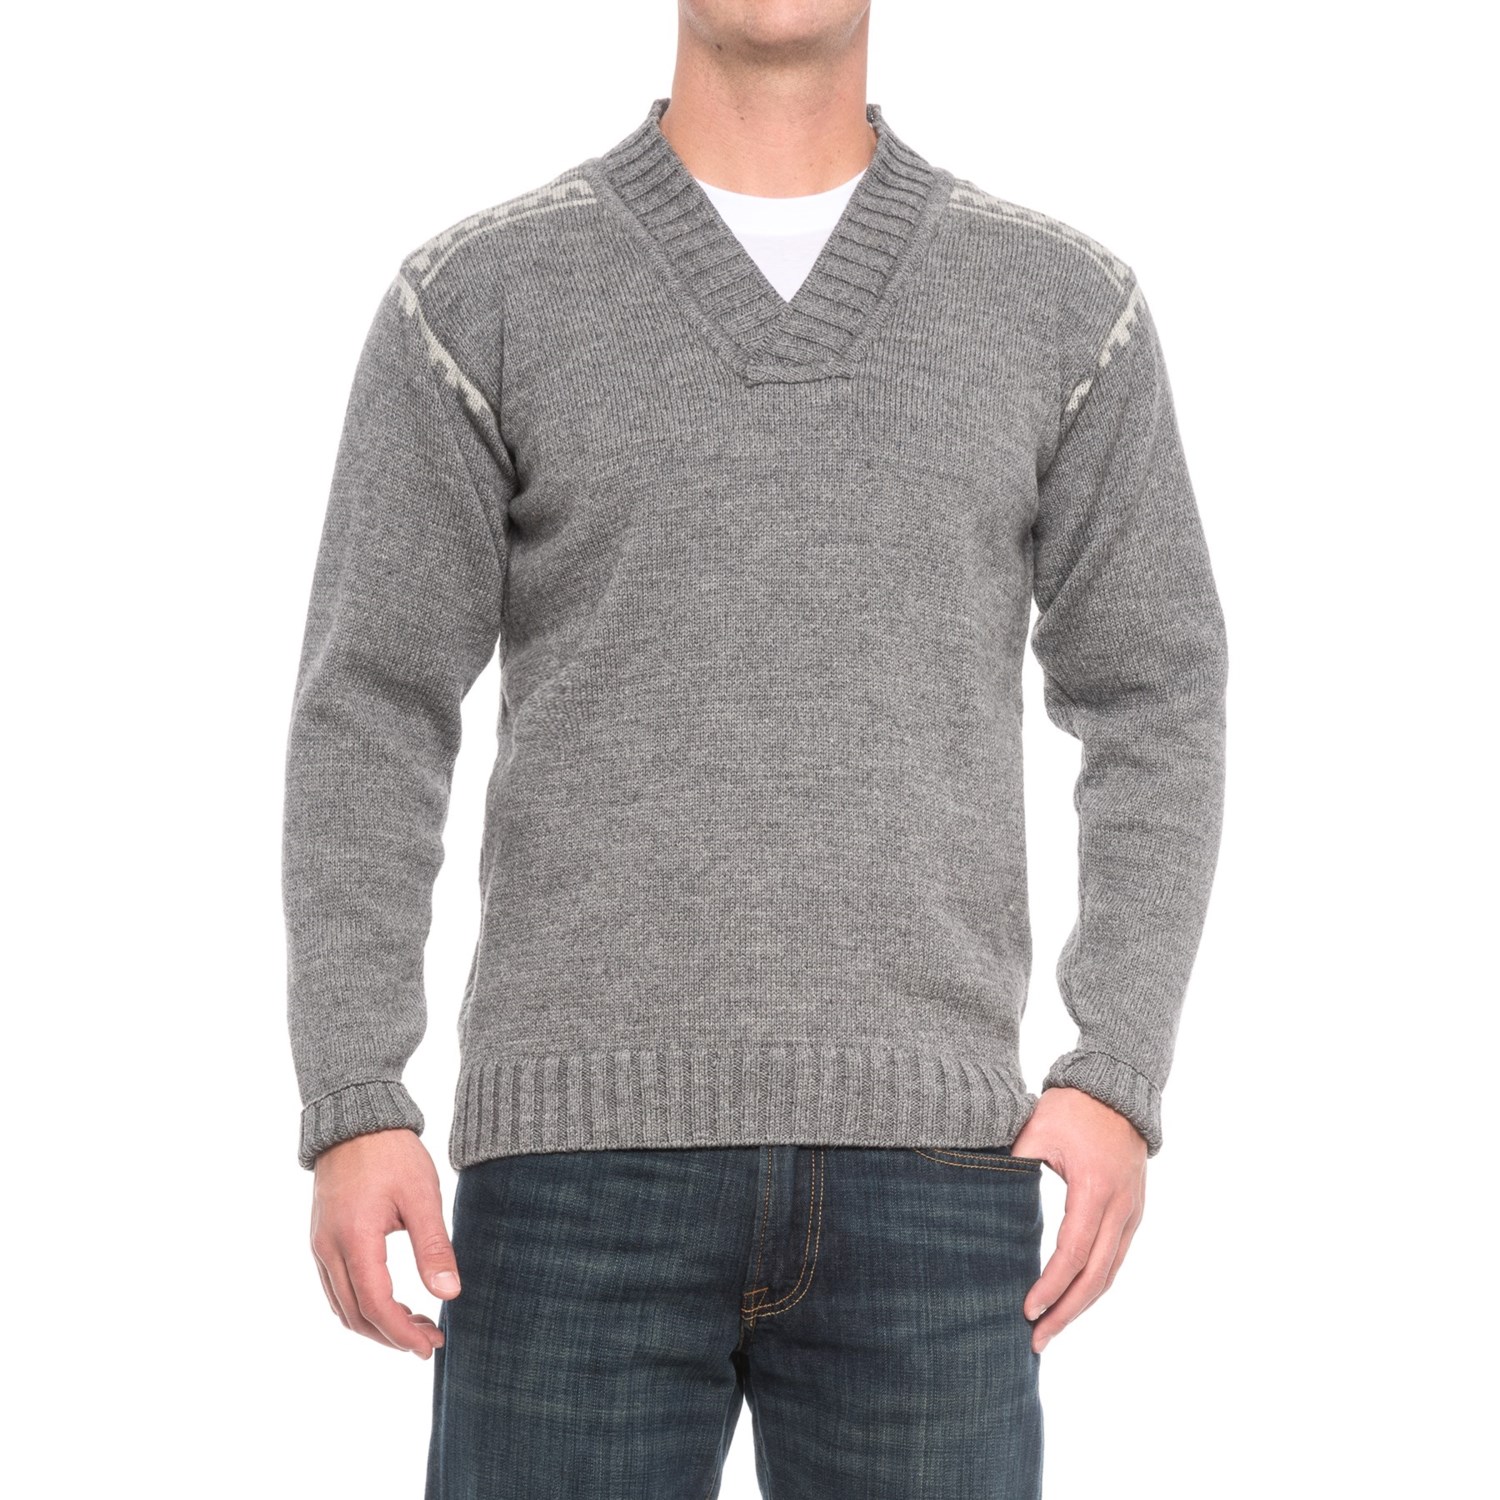 Dale of Norway Alpina Sweater (For Men) - Save 65%